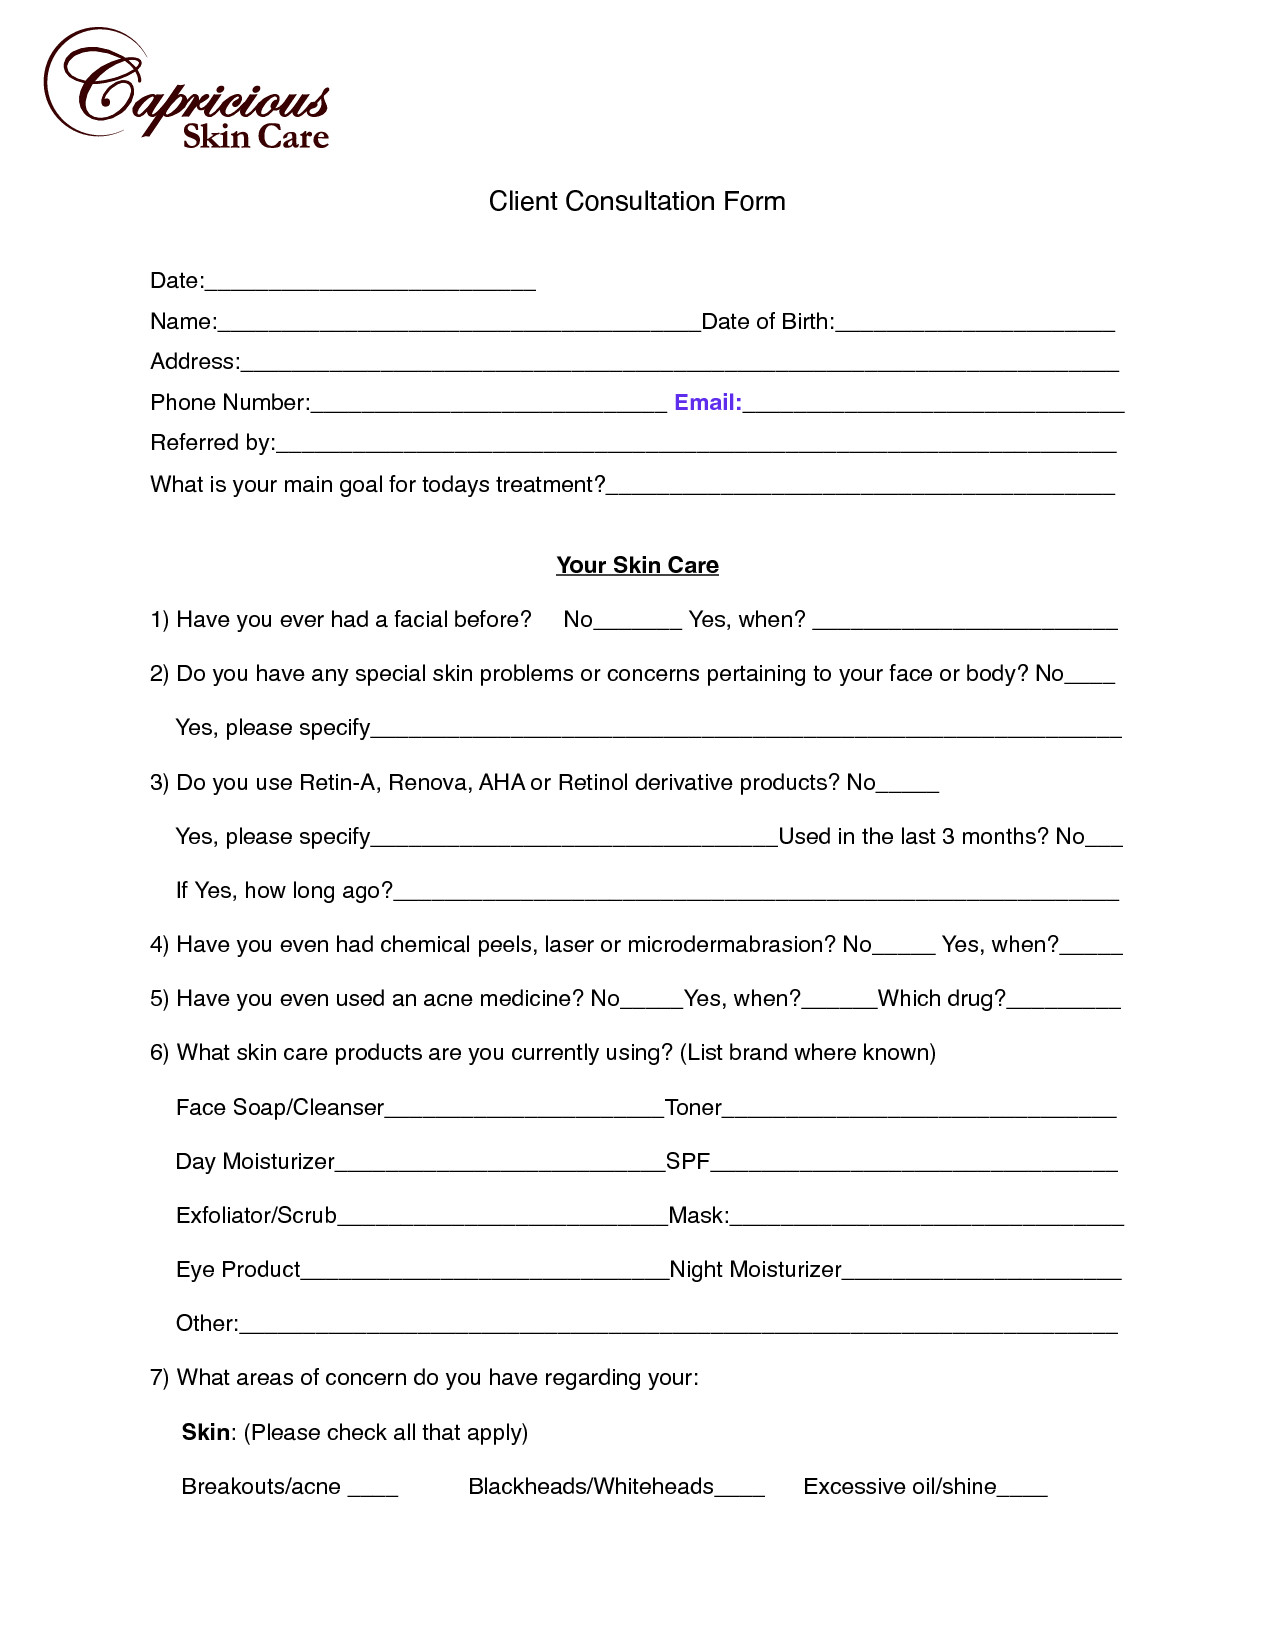 Waxing Consultation form Template Image Chemical Peel Consultation form